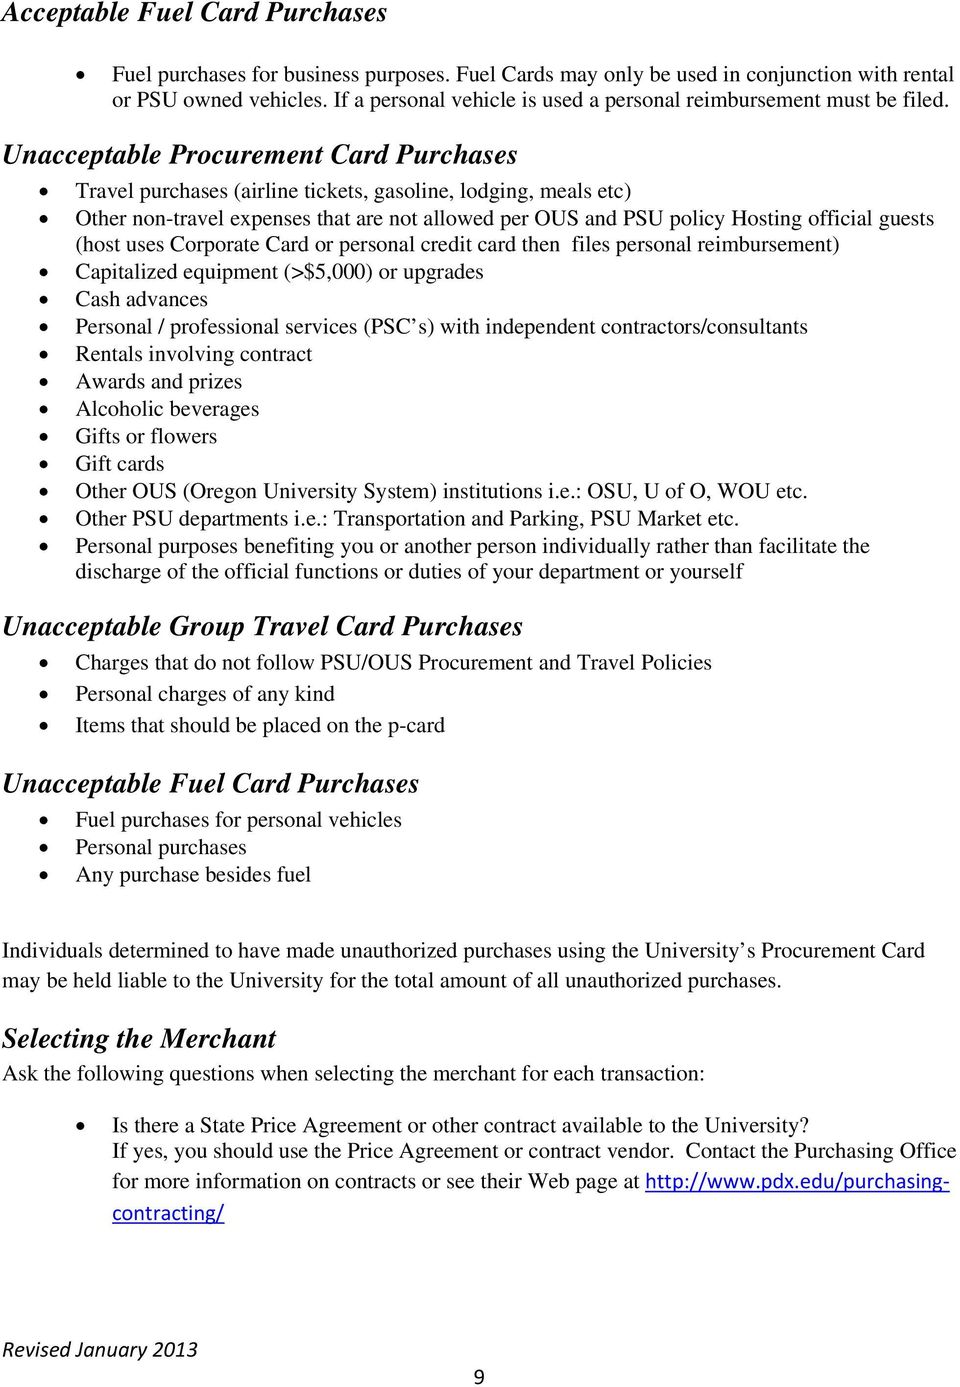 Unacceptable Procurement Card Purchases Travel purchases (airline tickets, gasoline, lodging, meals etc) Other non-travel expenses that are not allowed per OUS and PSU policy Hosting official guests